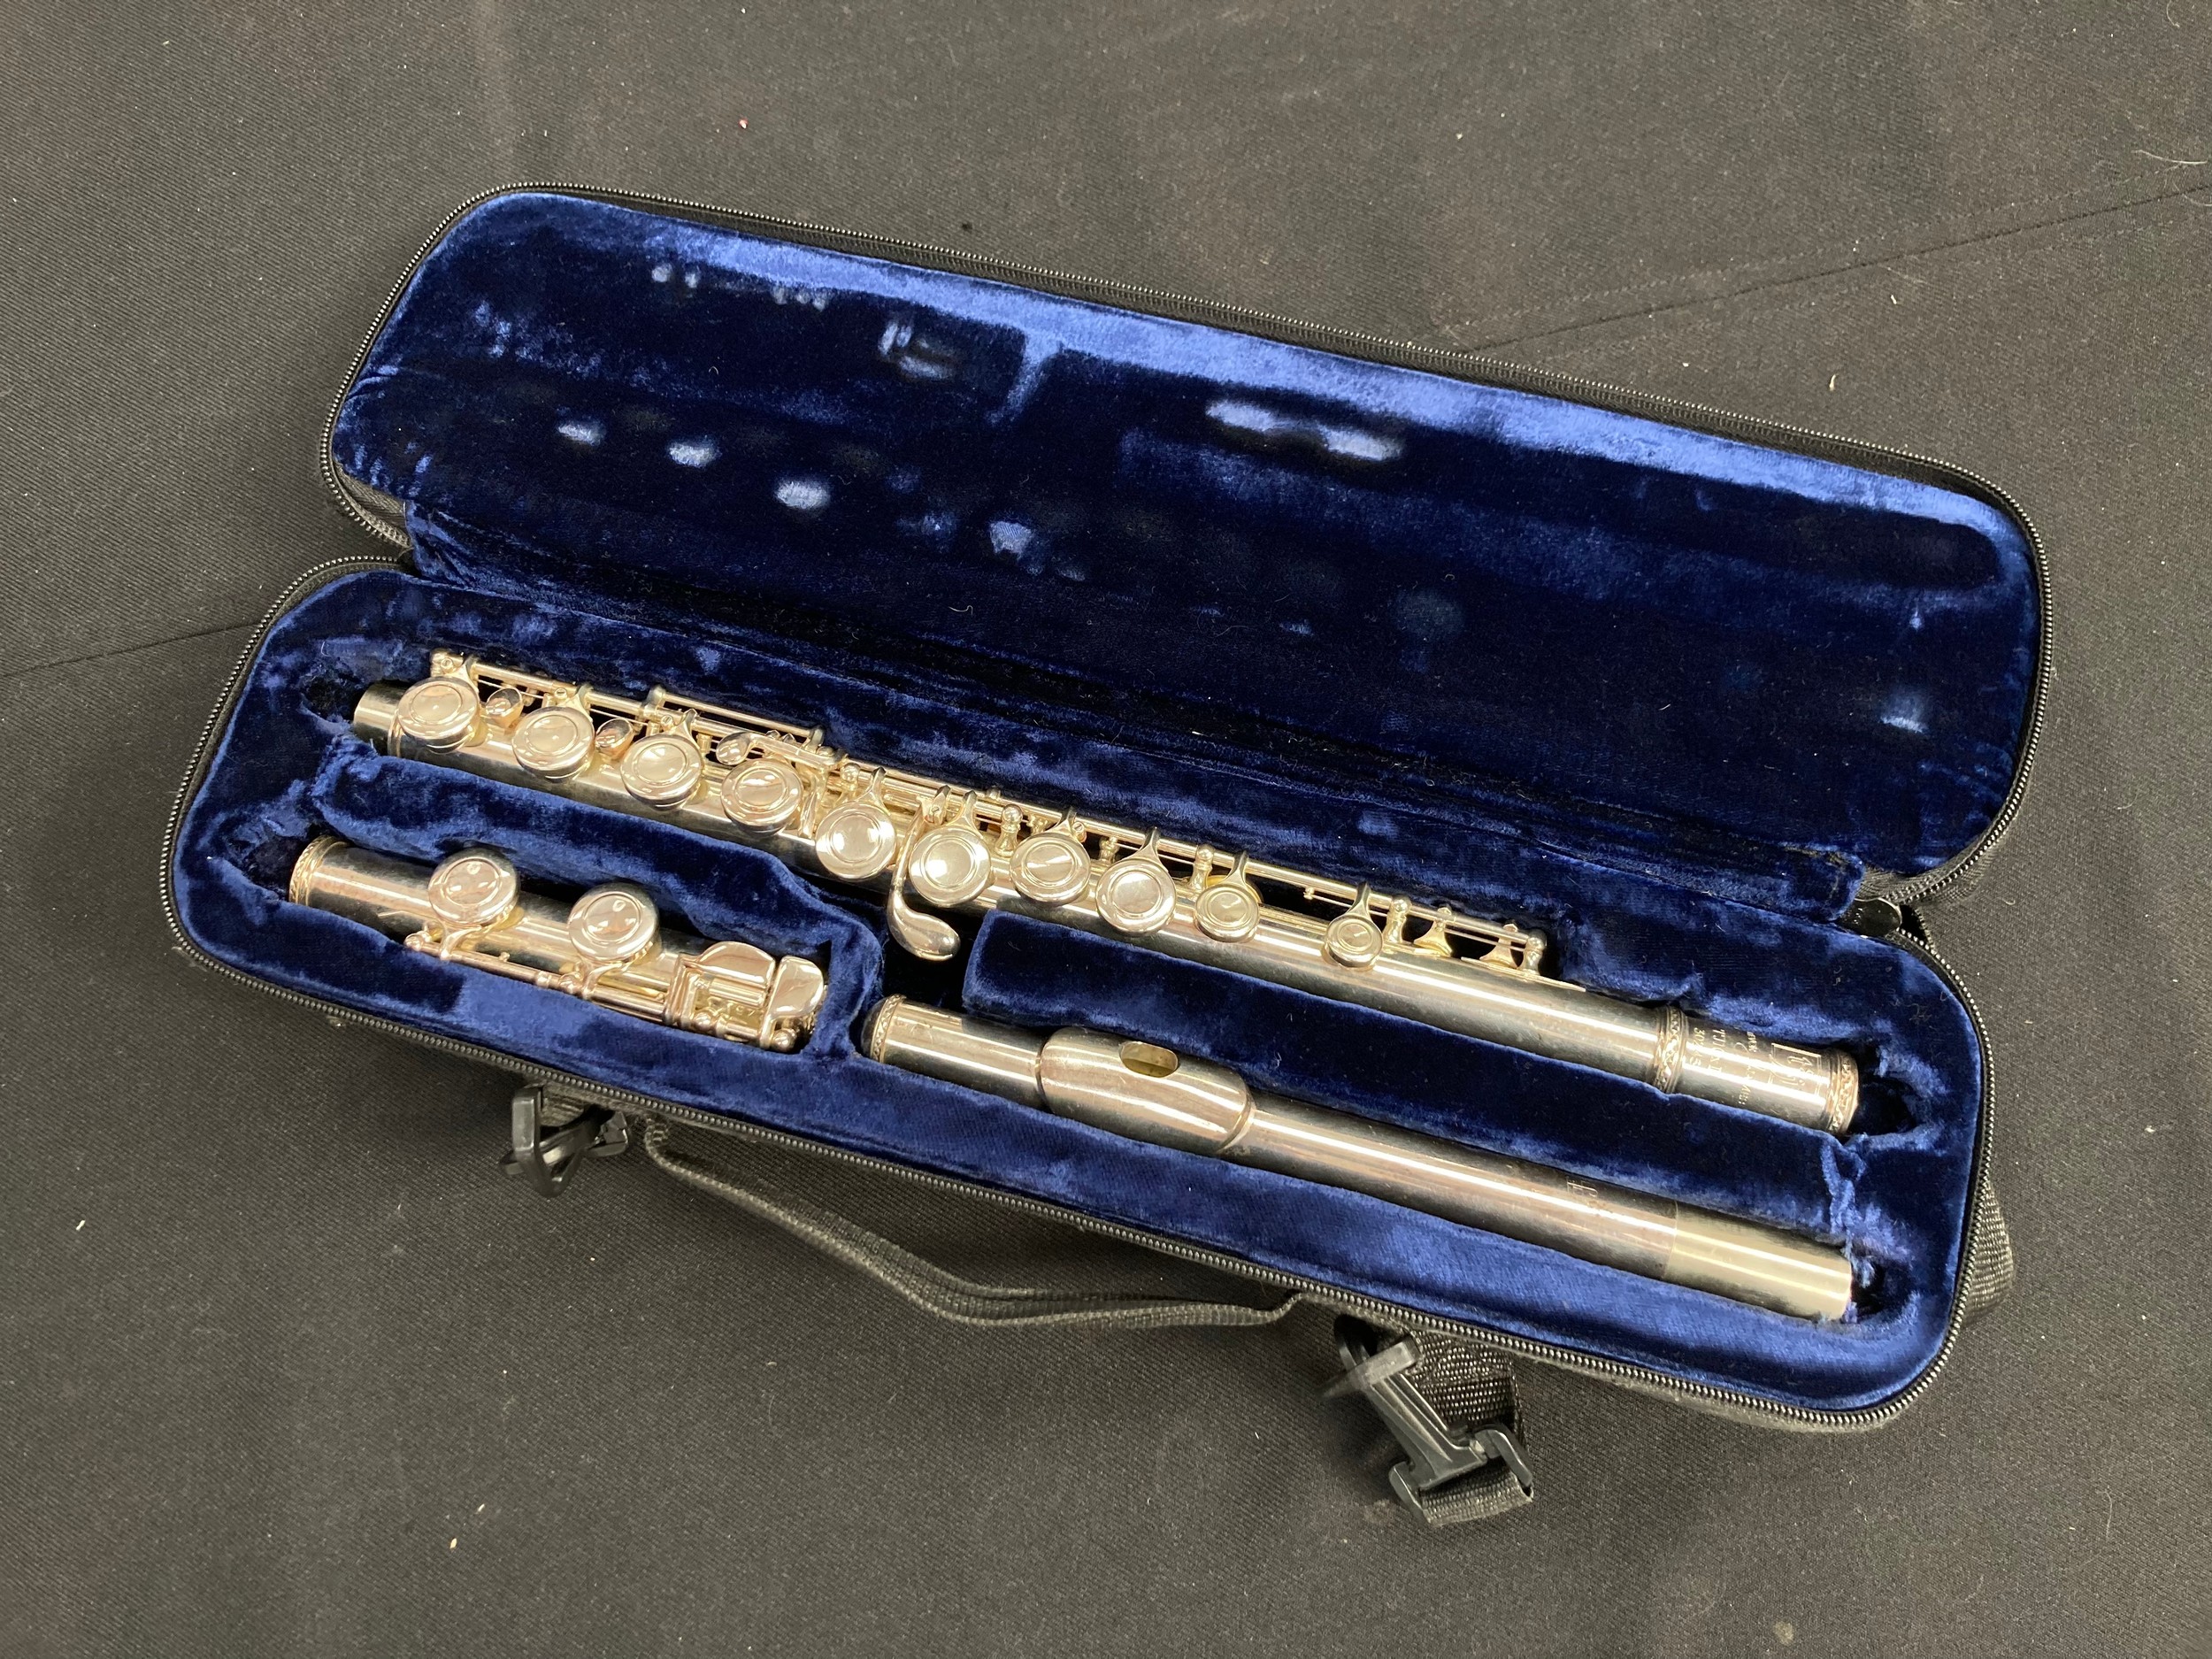 A Trevor James TJ10X111 flute, silver plated, cased